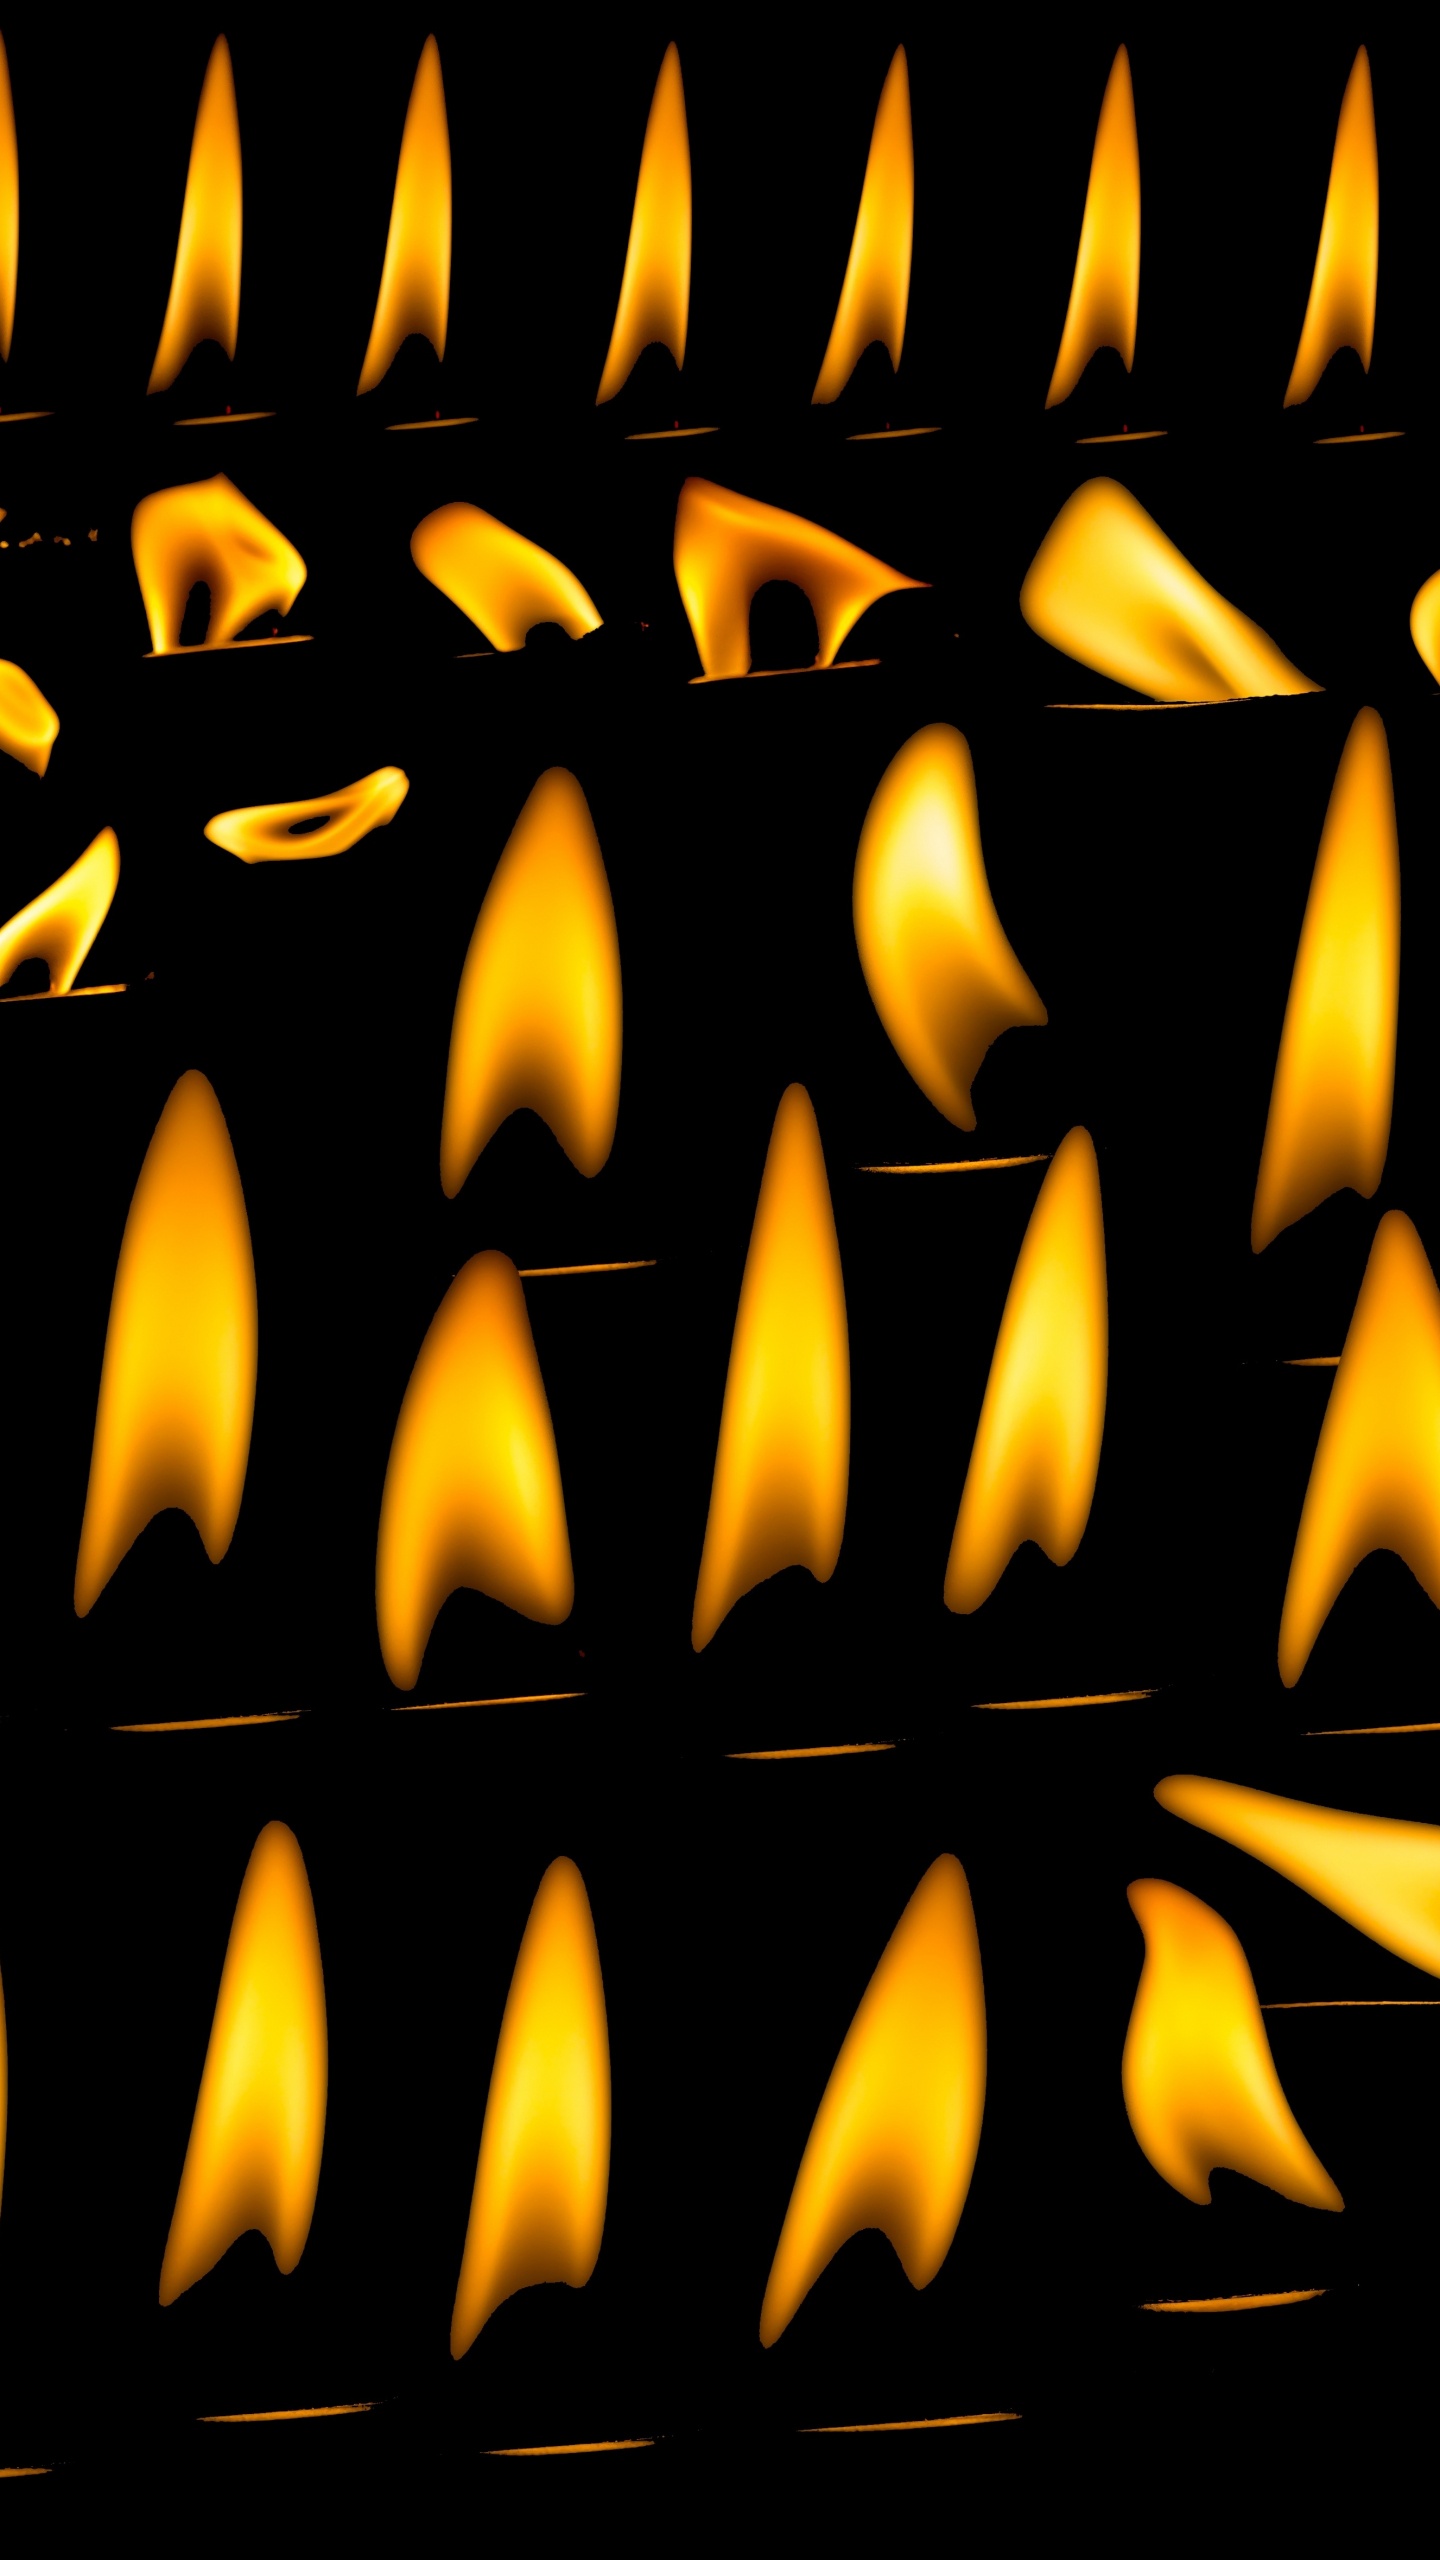 Yellow and Black Metal Frame. Wallpaper in 1440x2560 Resolution